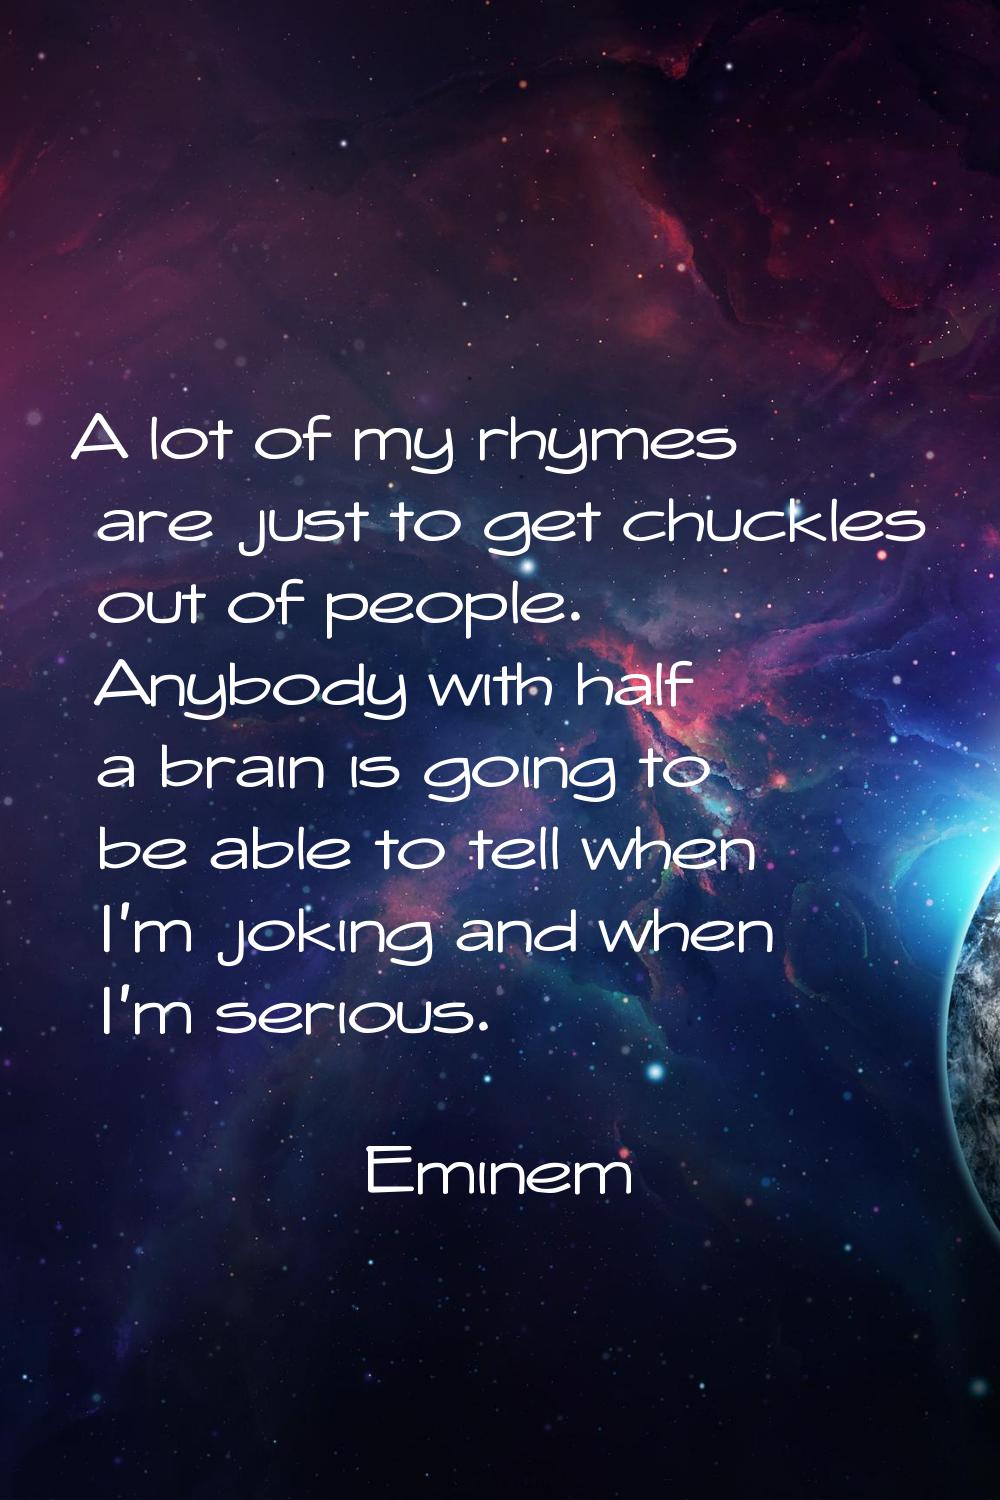 A lot of my rhymes are just to get chuckles out of people. Anybody with half a brain is going to be